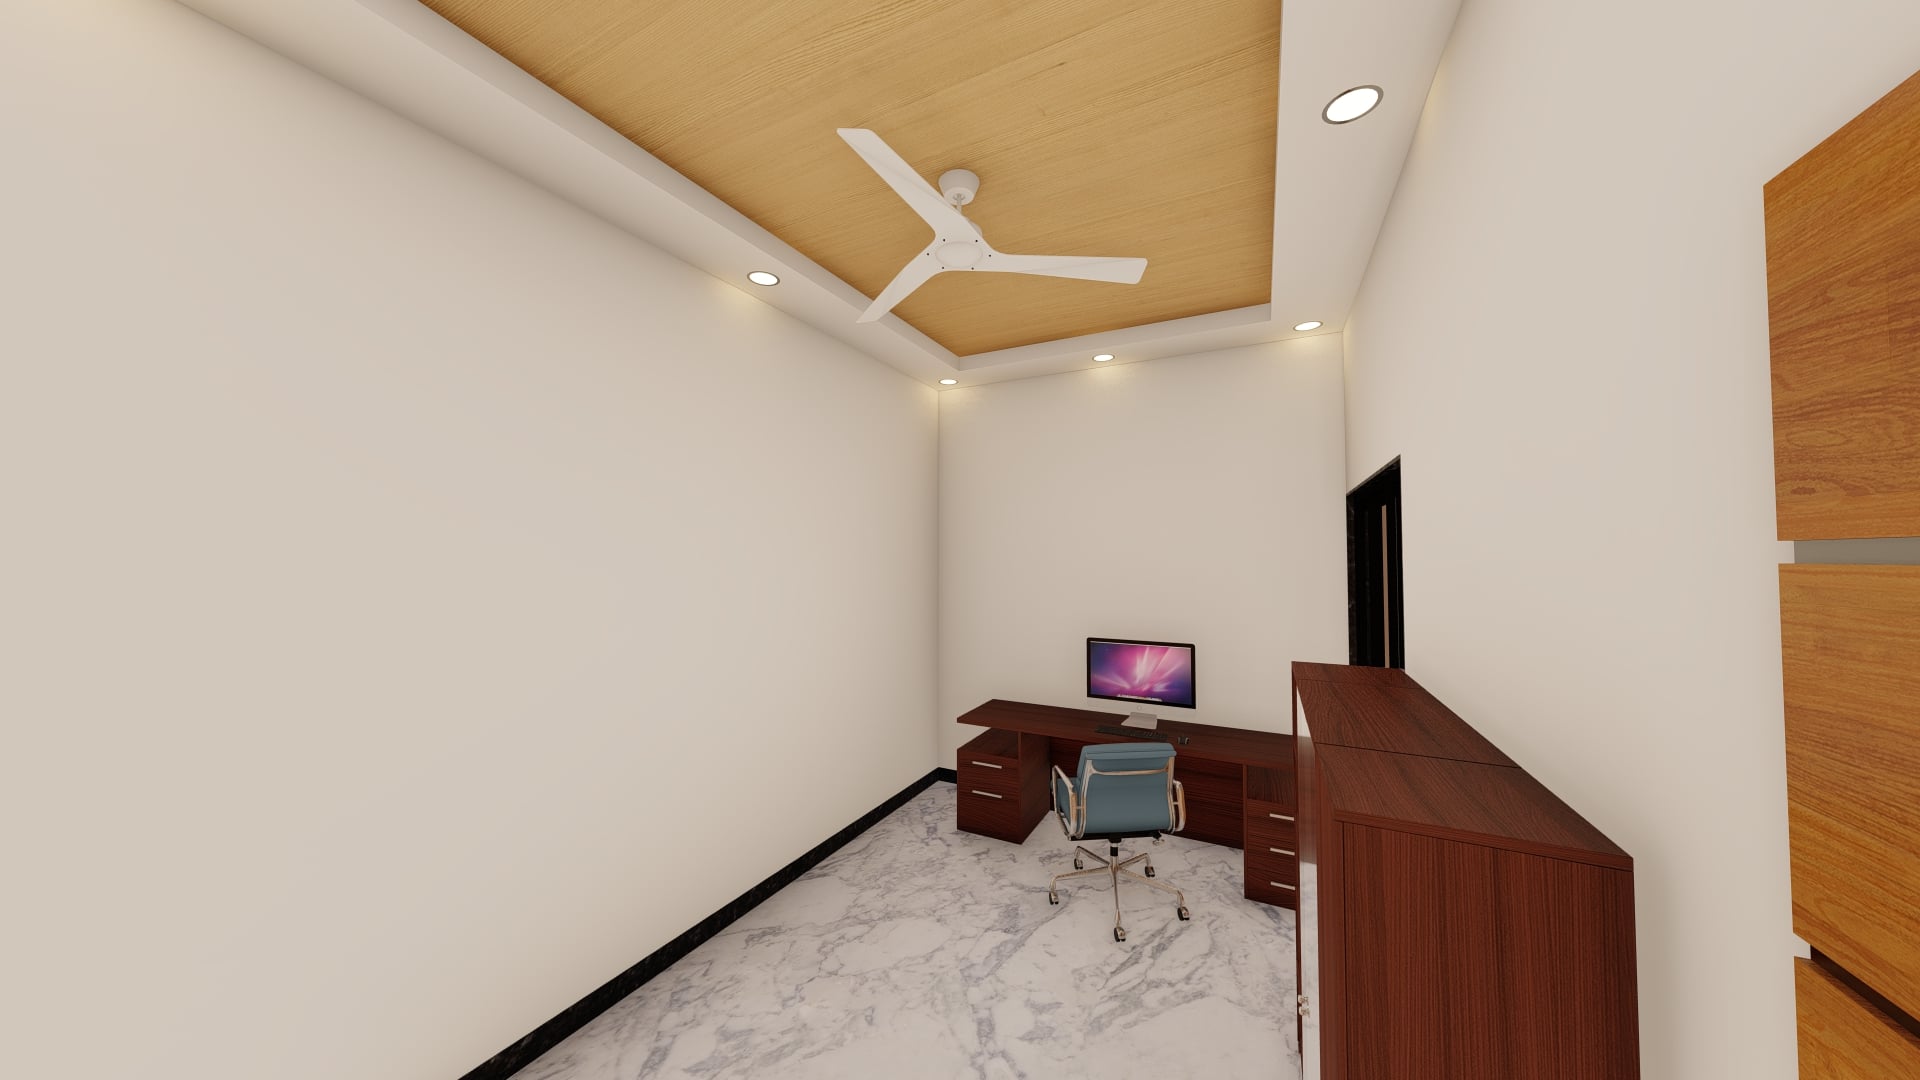 20x50 home office new duplex layout design by urban terrace north facing